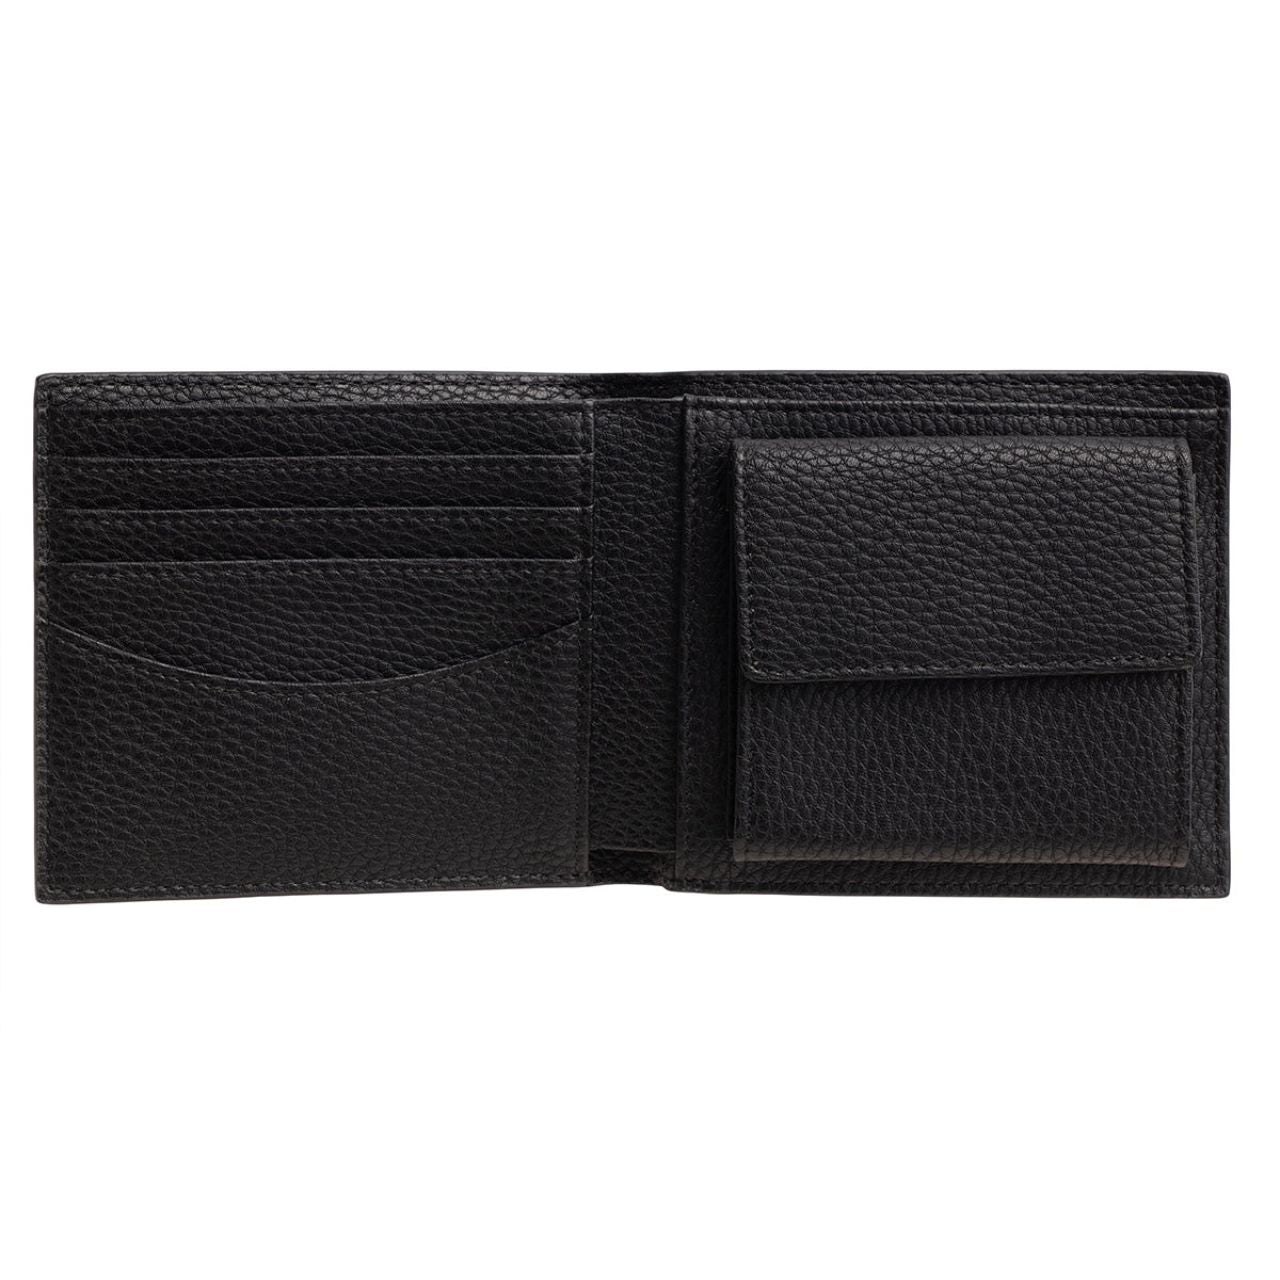 Black Billfold Wallet  For those who appreciate simplicity, our Black Billfold Wallet is the ultimate choice. Its sleek black design is both versatile and functional, making it a perfect companion for your everyday adventures.